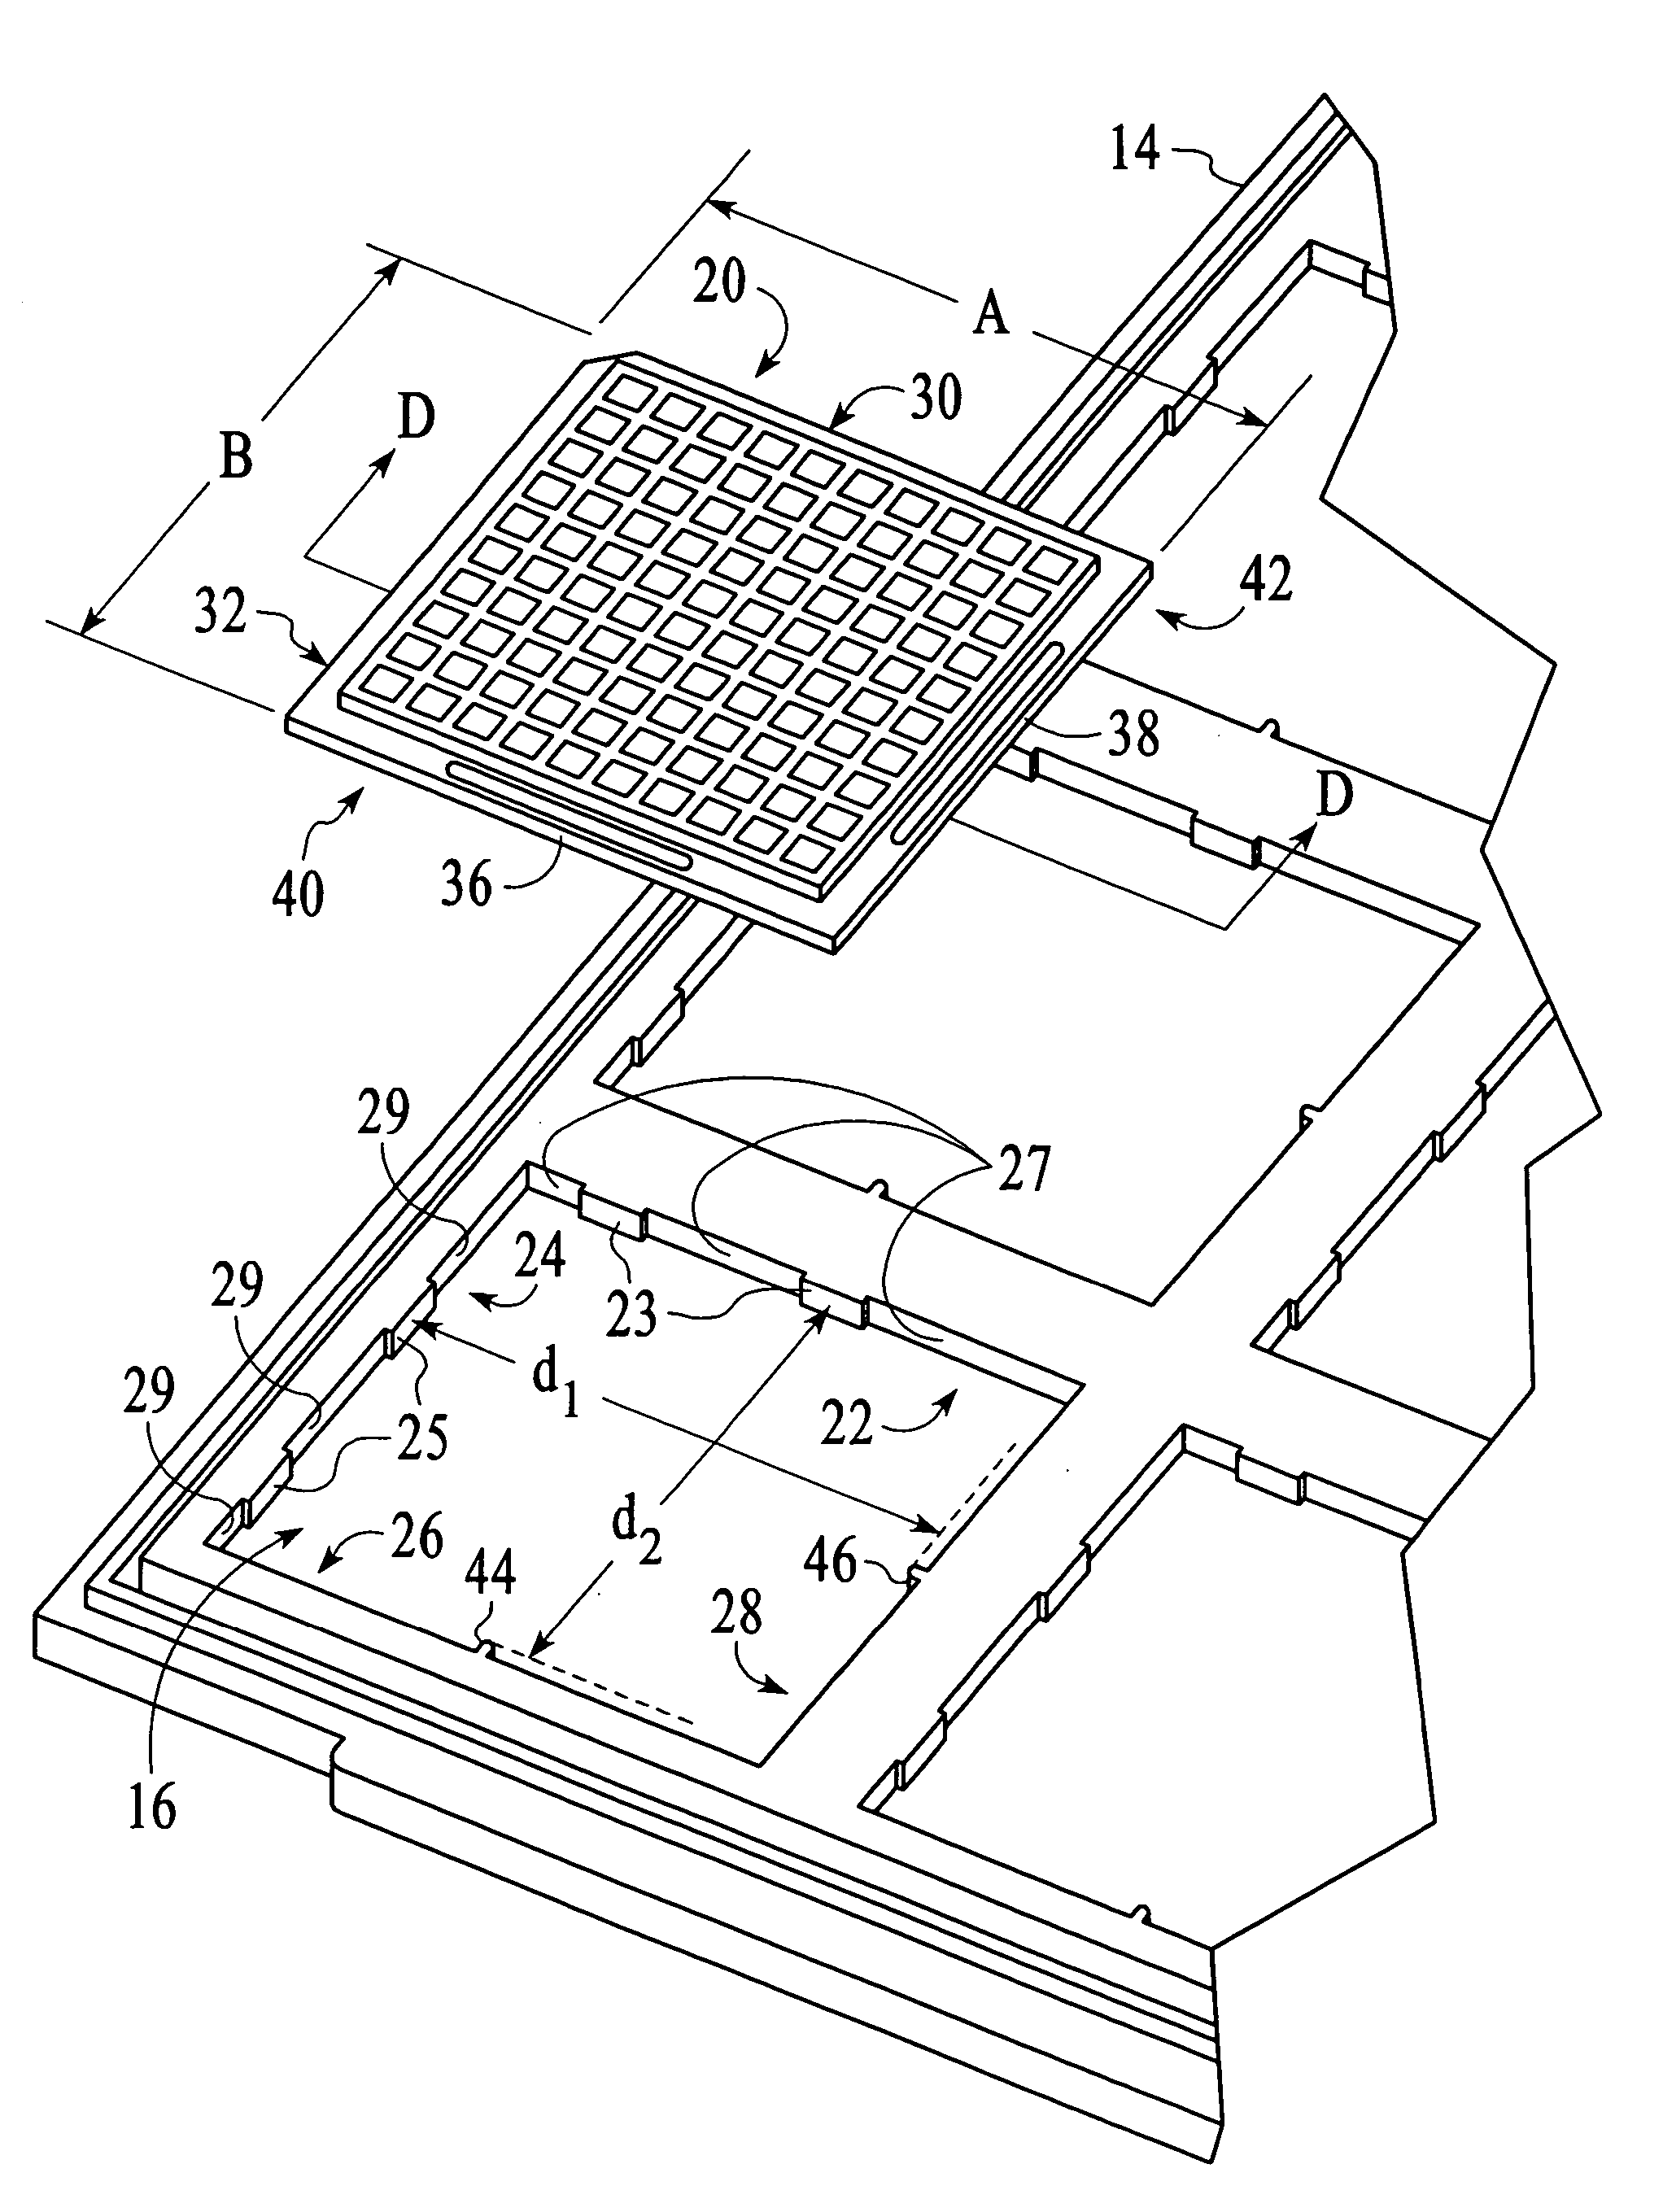 Self aligning tray and carrier apparatus